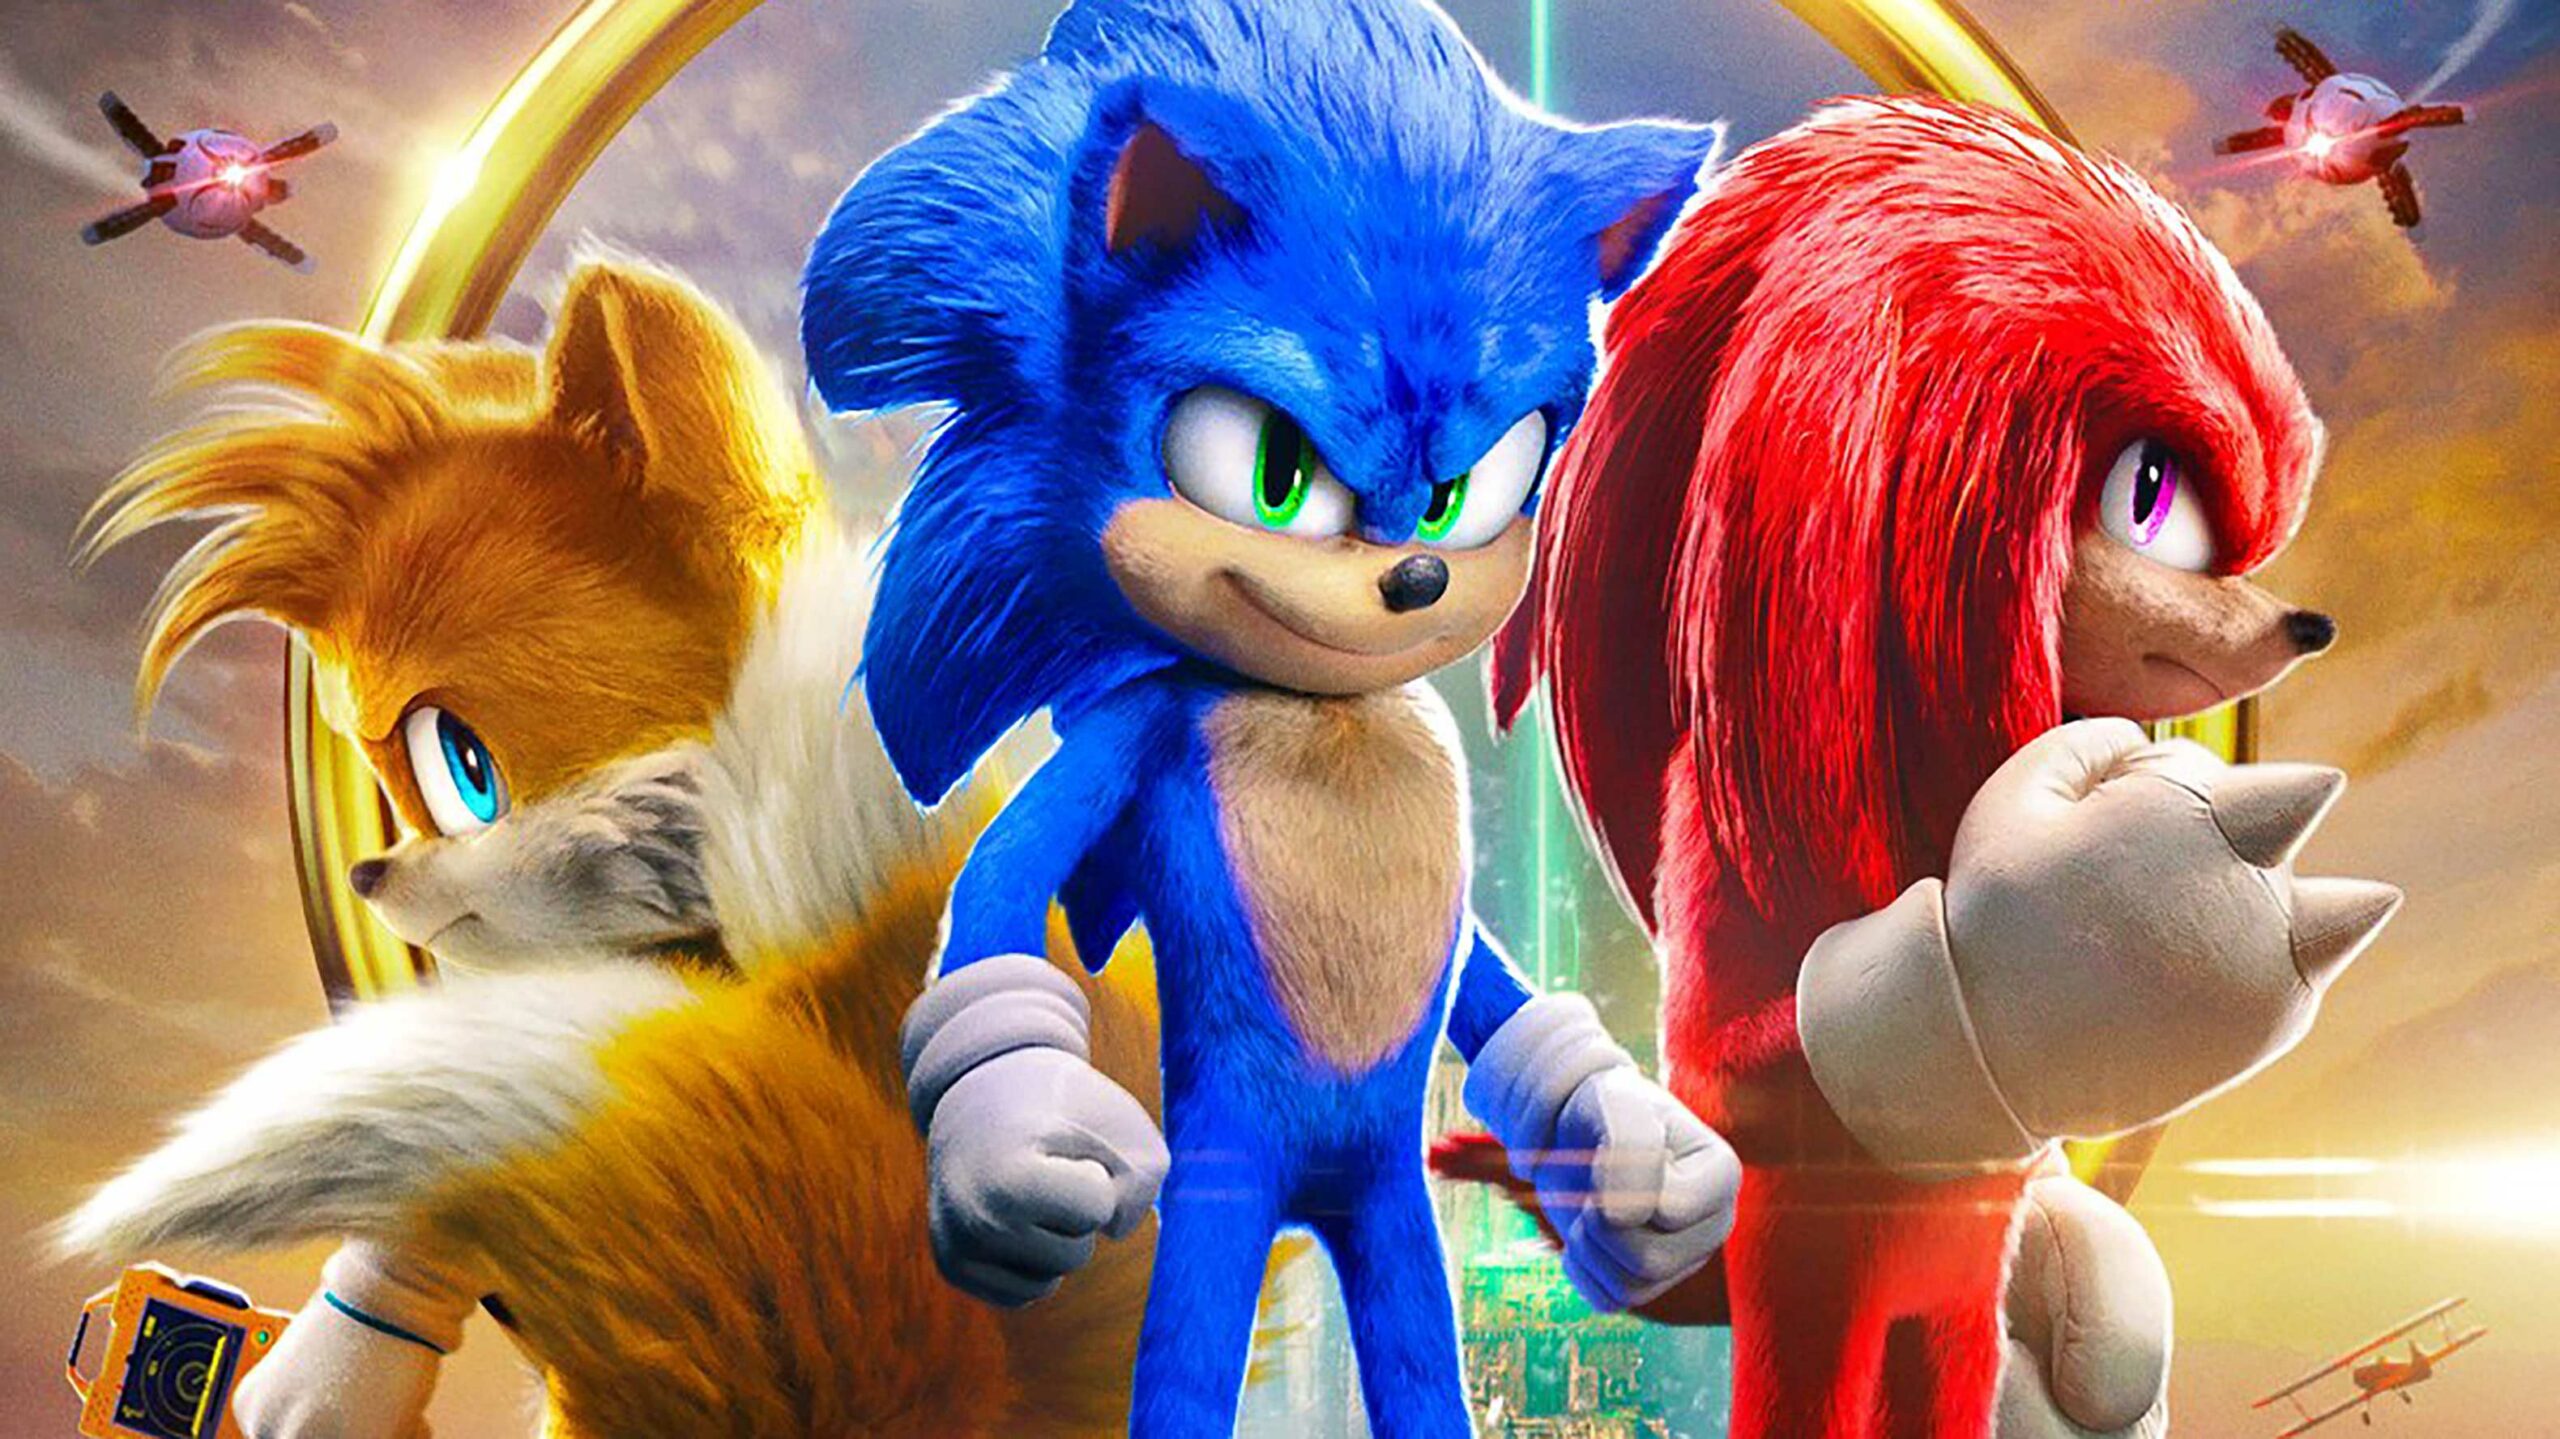 Sonic the Hedgehog 2 -- Sonic stands in front of Tails and Knuckles the Echidna